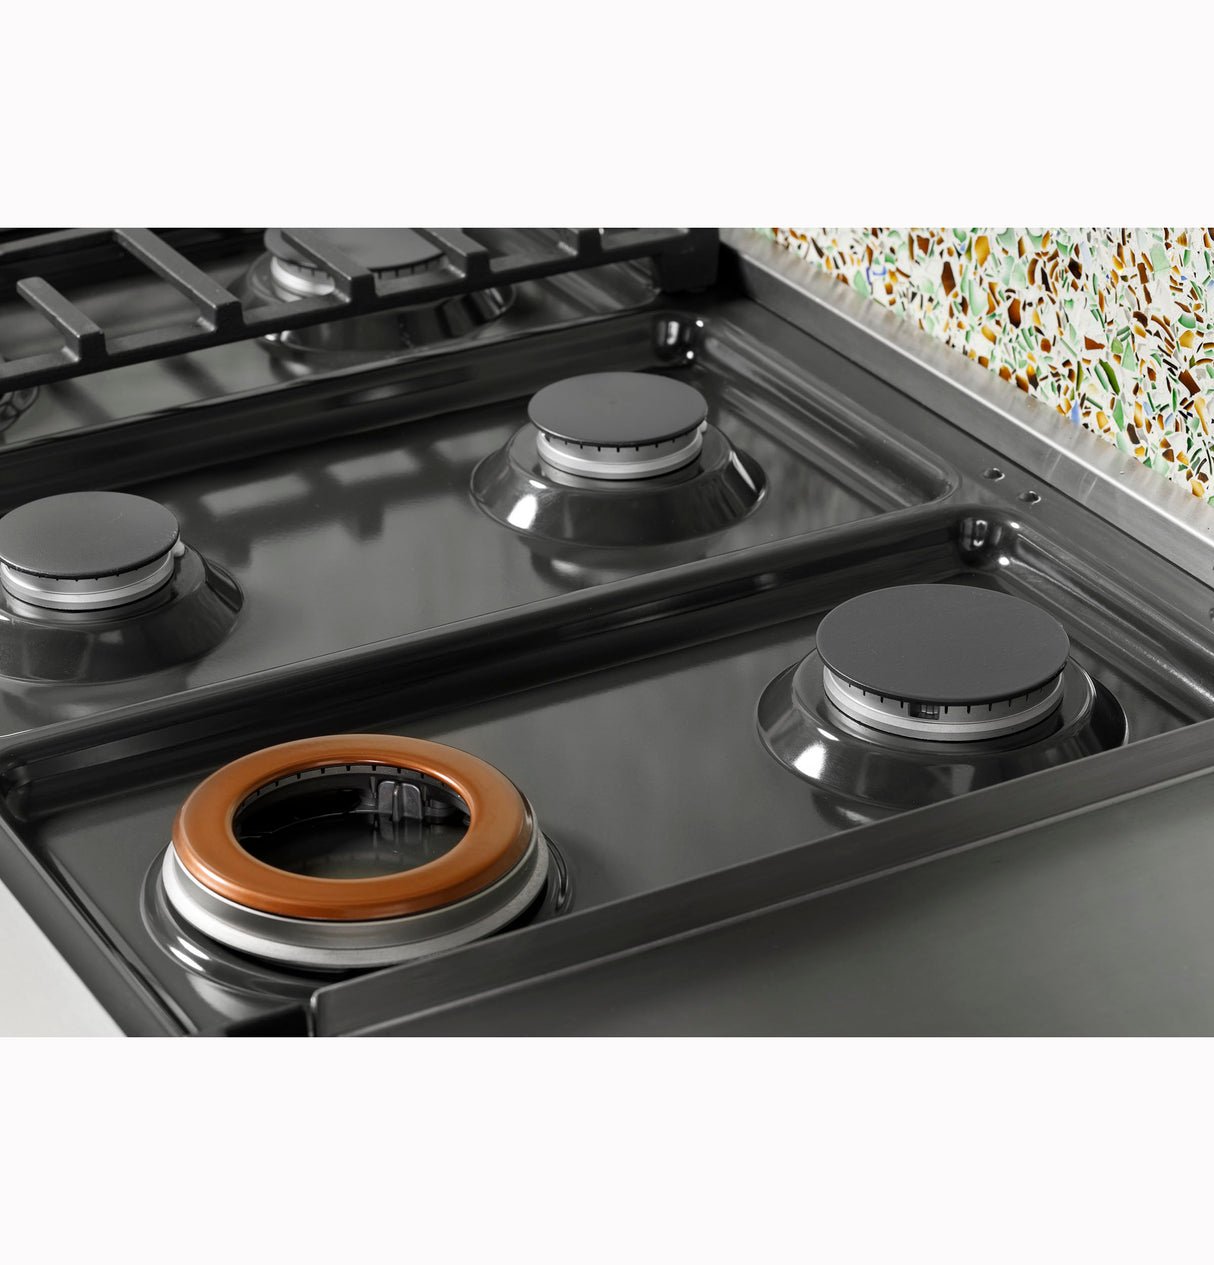 Caf(eback)(TM) 48" Commercial-Style Gas Rangetop with 6 Burners and Integrated Griddle (Natural Gas) - (CGU486P4TW2)